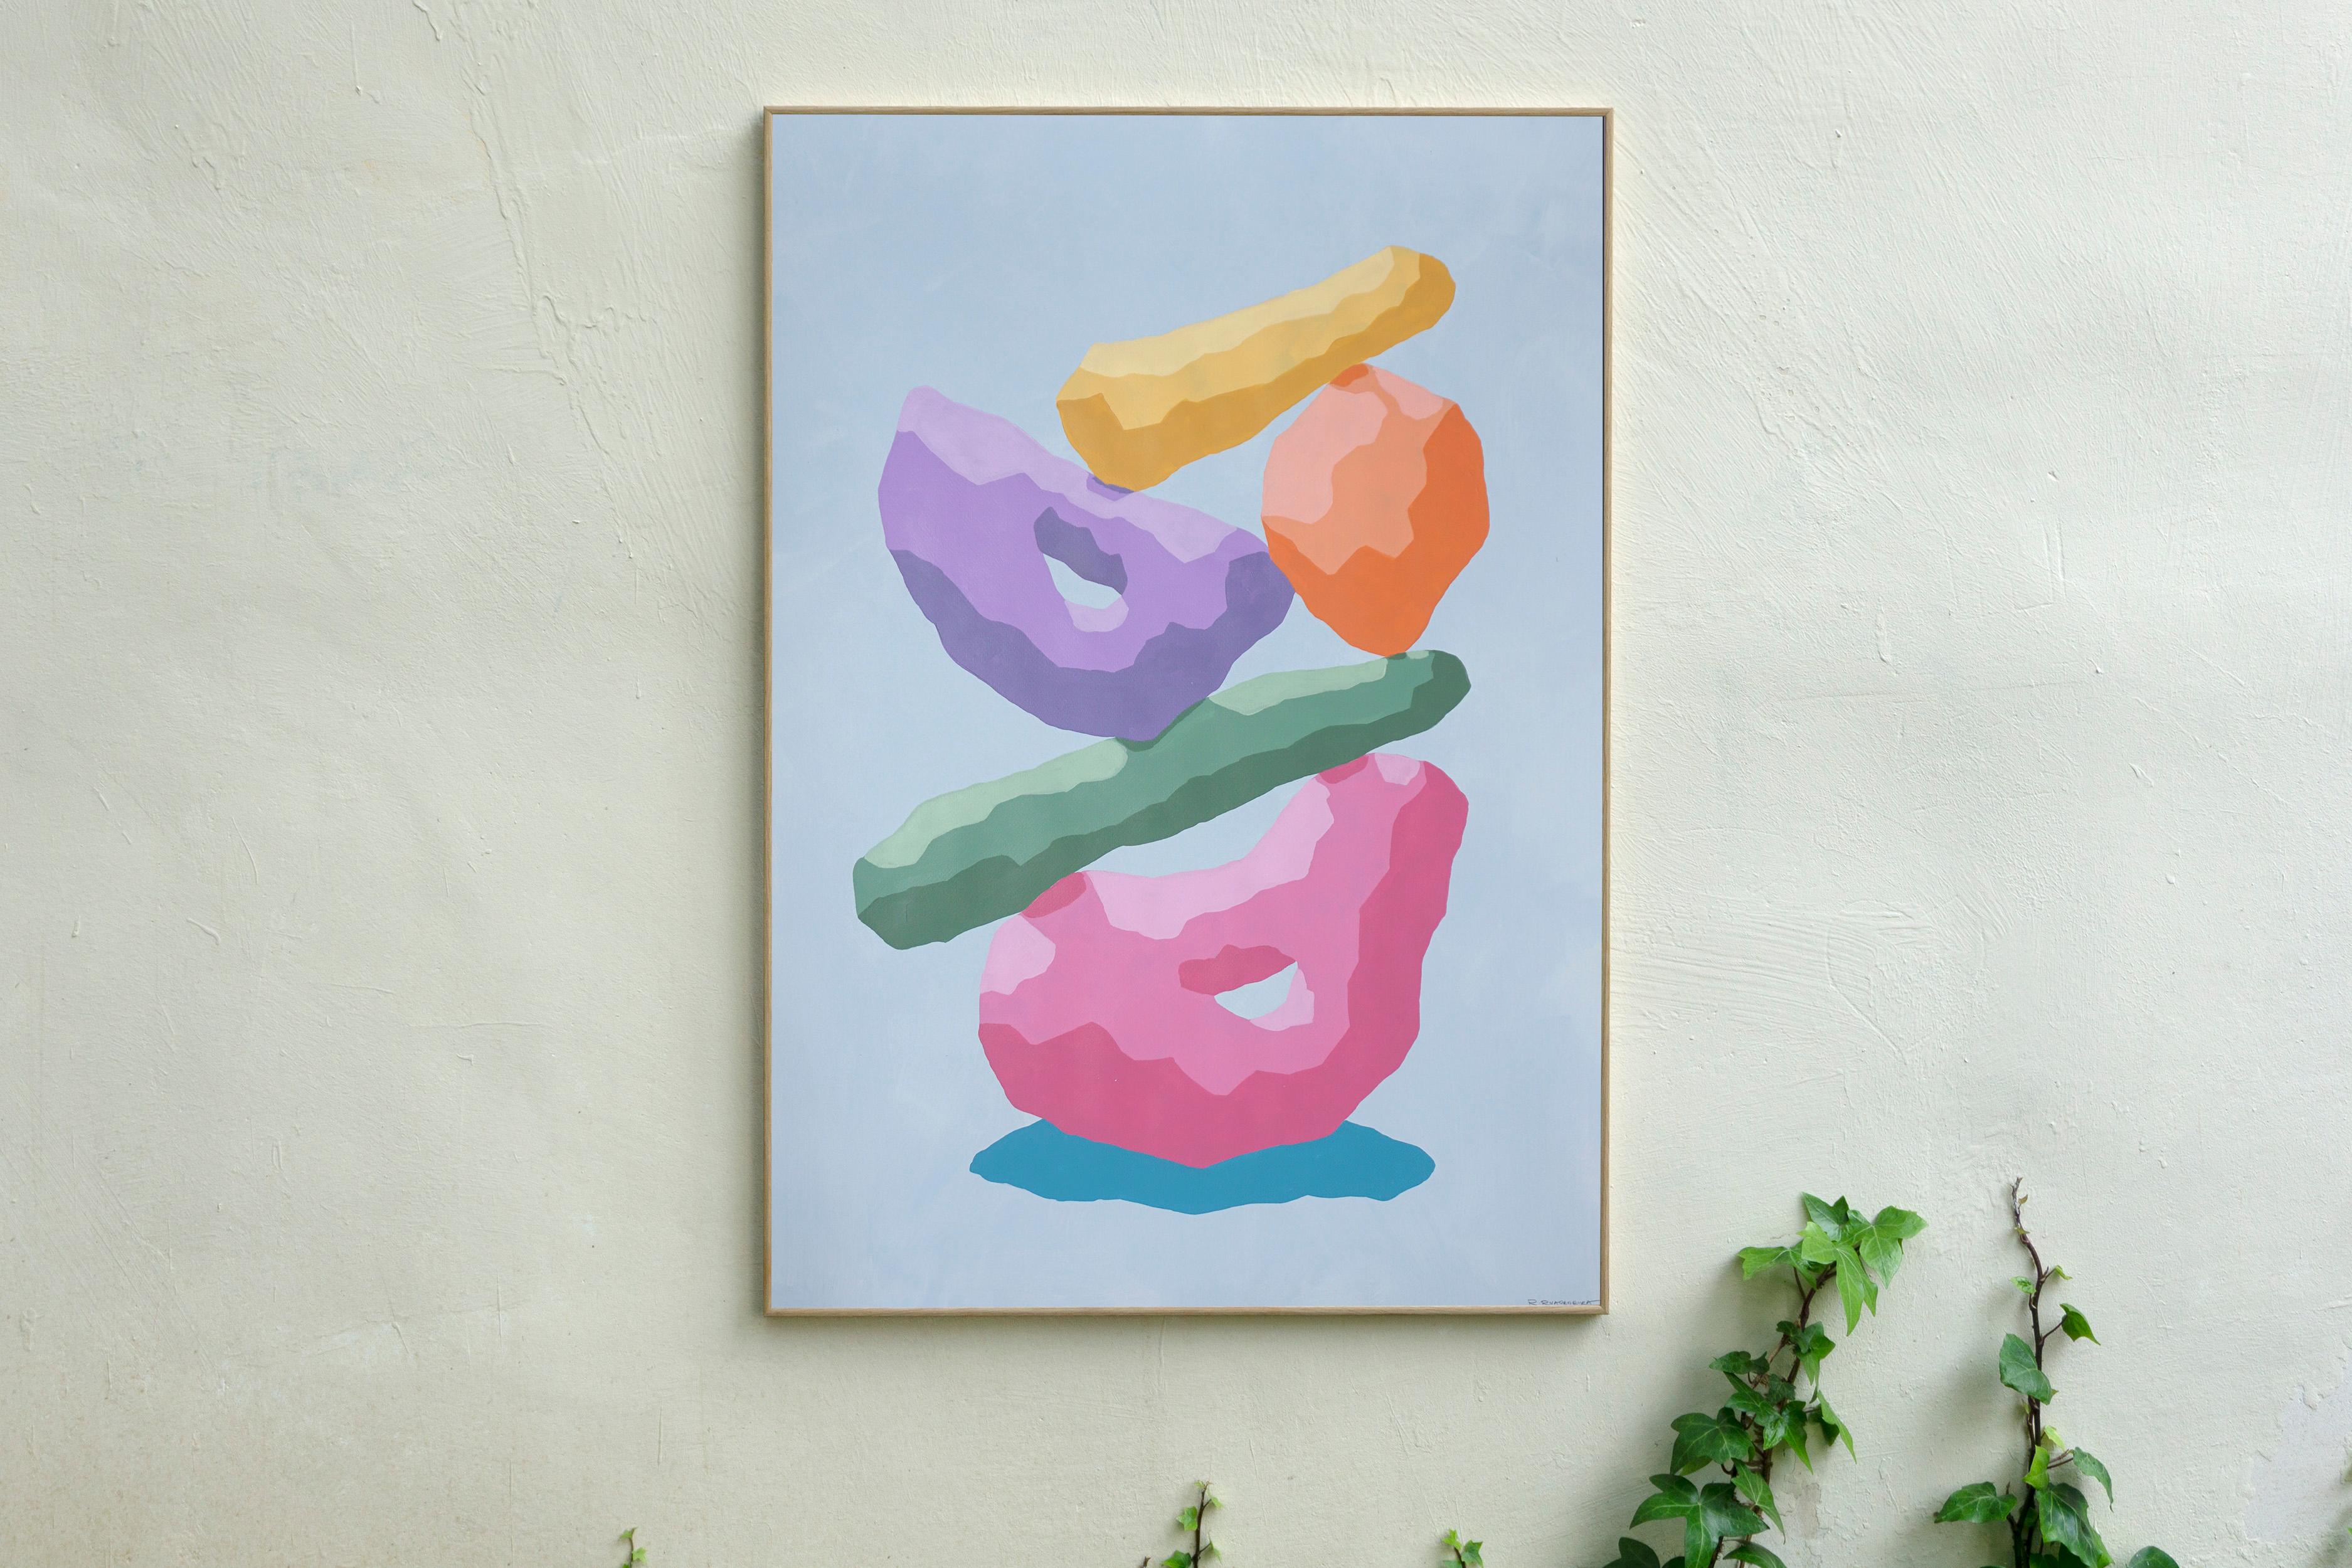 Rainbow Totem, Pastel Tones 3D Render Style Sculpture, Pink, Blue, Yellow Shapes - Synthetic Cubist Painting by Ryan Rivadeneyra